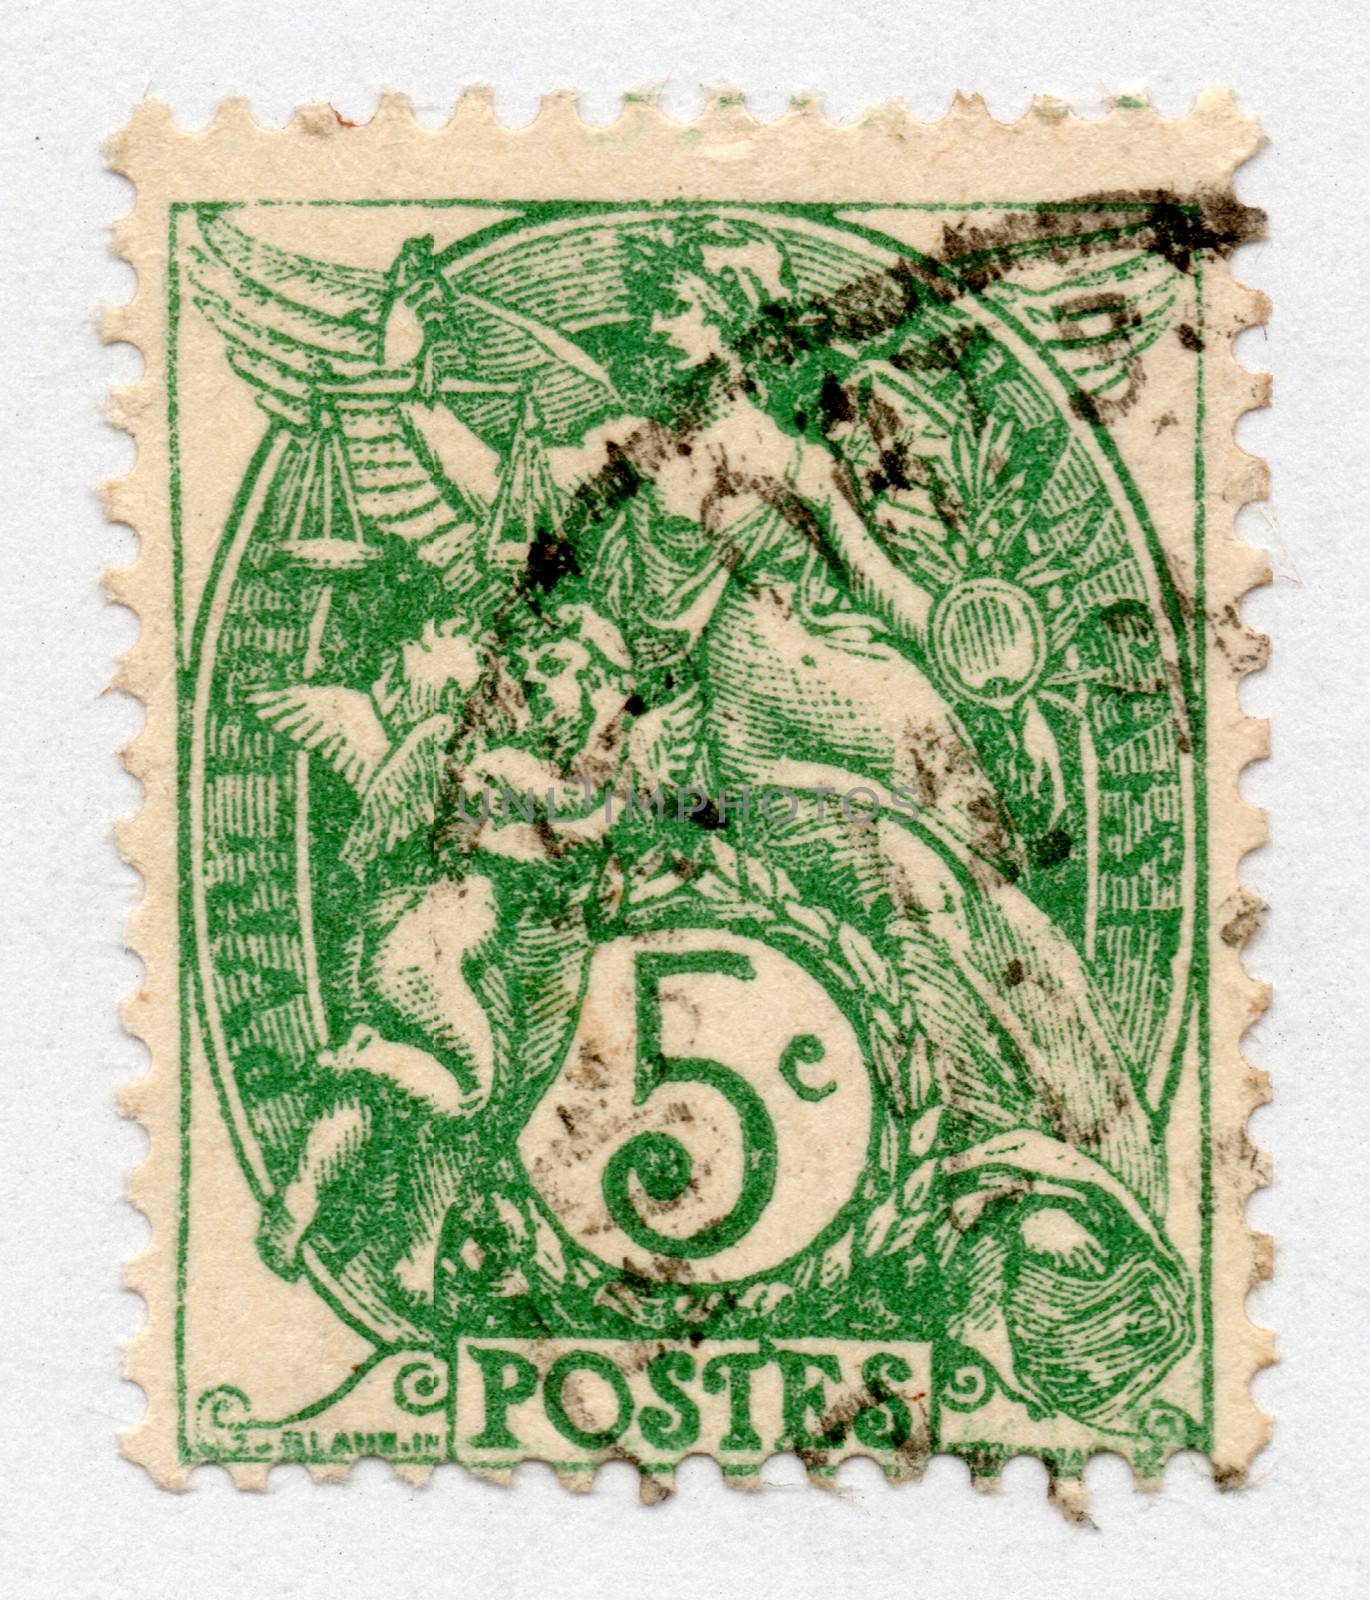 Circa 1900: stamp printed by France, shows Liberty, Equality, Fraternity, circa 1900